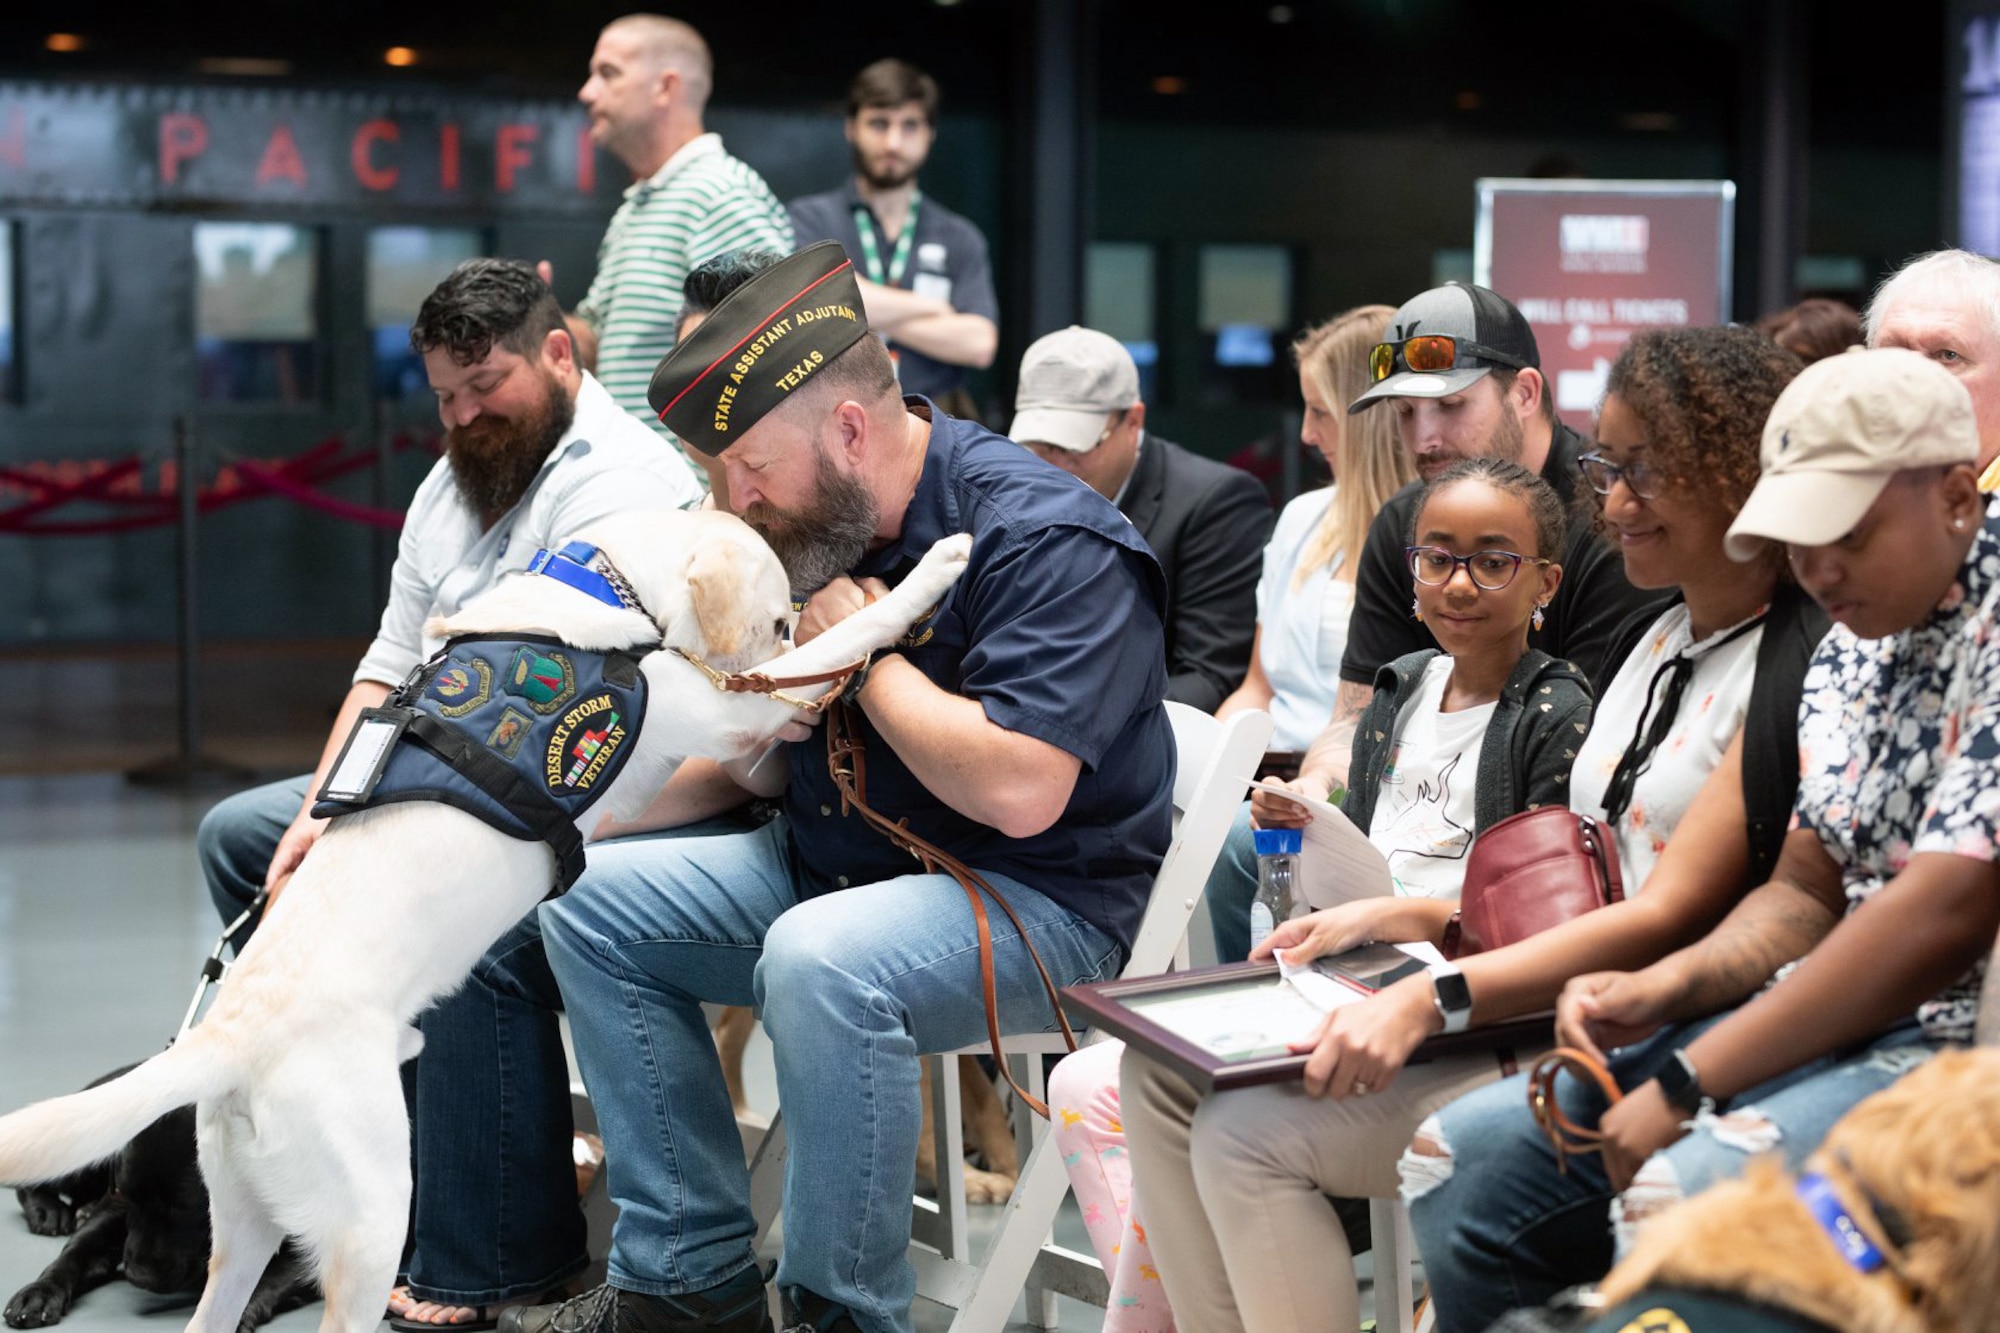 Andrew Camplen, on his graduation day when he received Sebestian, his service dog at the National WWII Museum, New Orleans, LA, Aug. 24, 2019. “I was sitting in a chair waiting on my dog to be delivered. And I have to say that Monday, my heart was pounding, and the adrenaline rush, and then Sebastian was walked into the room by his trainer. Camplen is now the Director of Client Services for the United States Veterans Service Dogs, which was created for and dedicated to helping veterans return to a new “Normal” by training and placing quality service dogs with veterans.